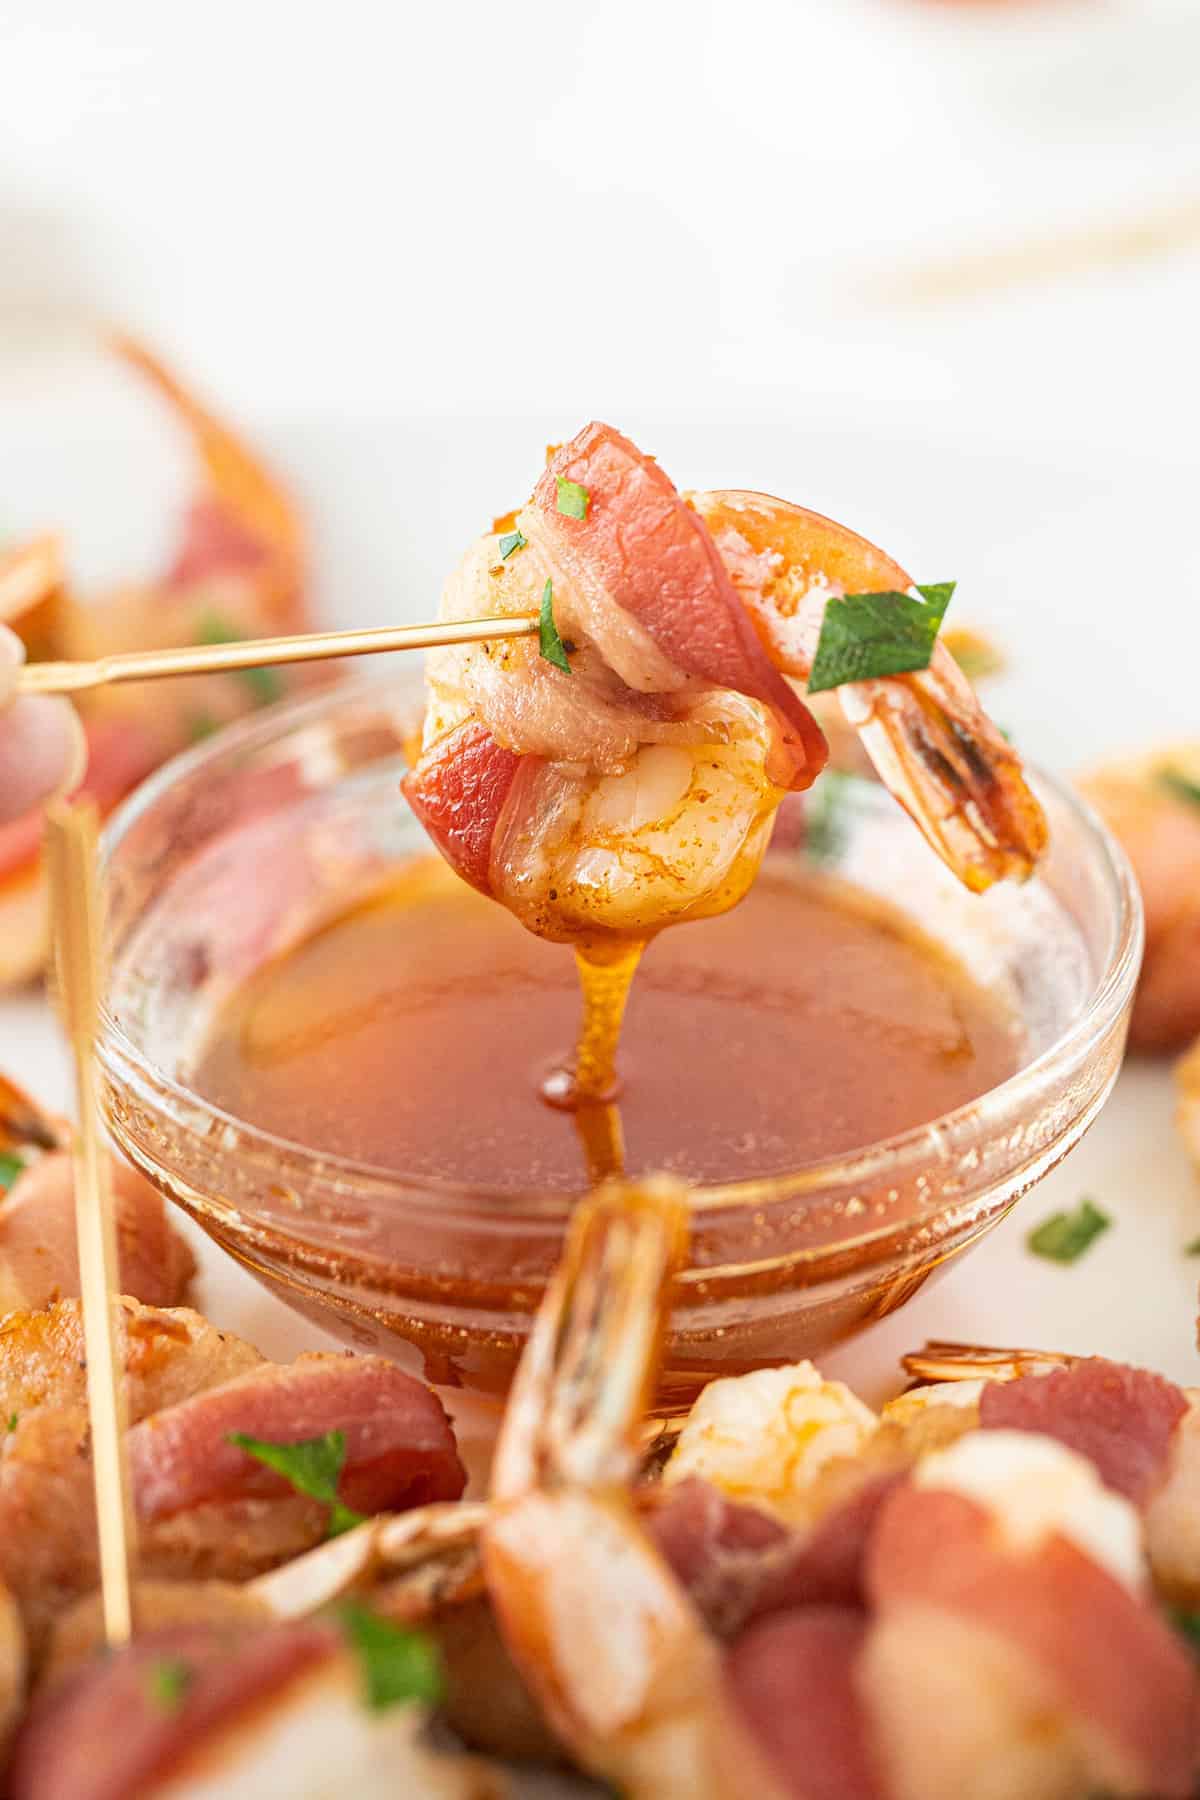 https://www.thekitchenmagpie.com/wp-content/uploads/images/2021/10/baconwrappedshrimpinsauce.jpg